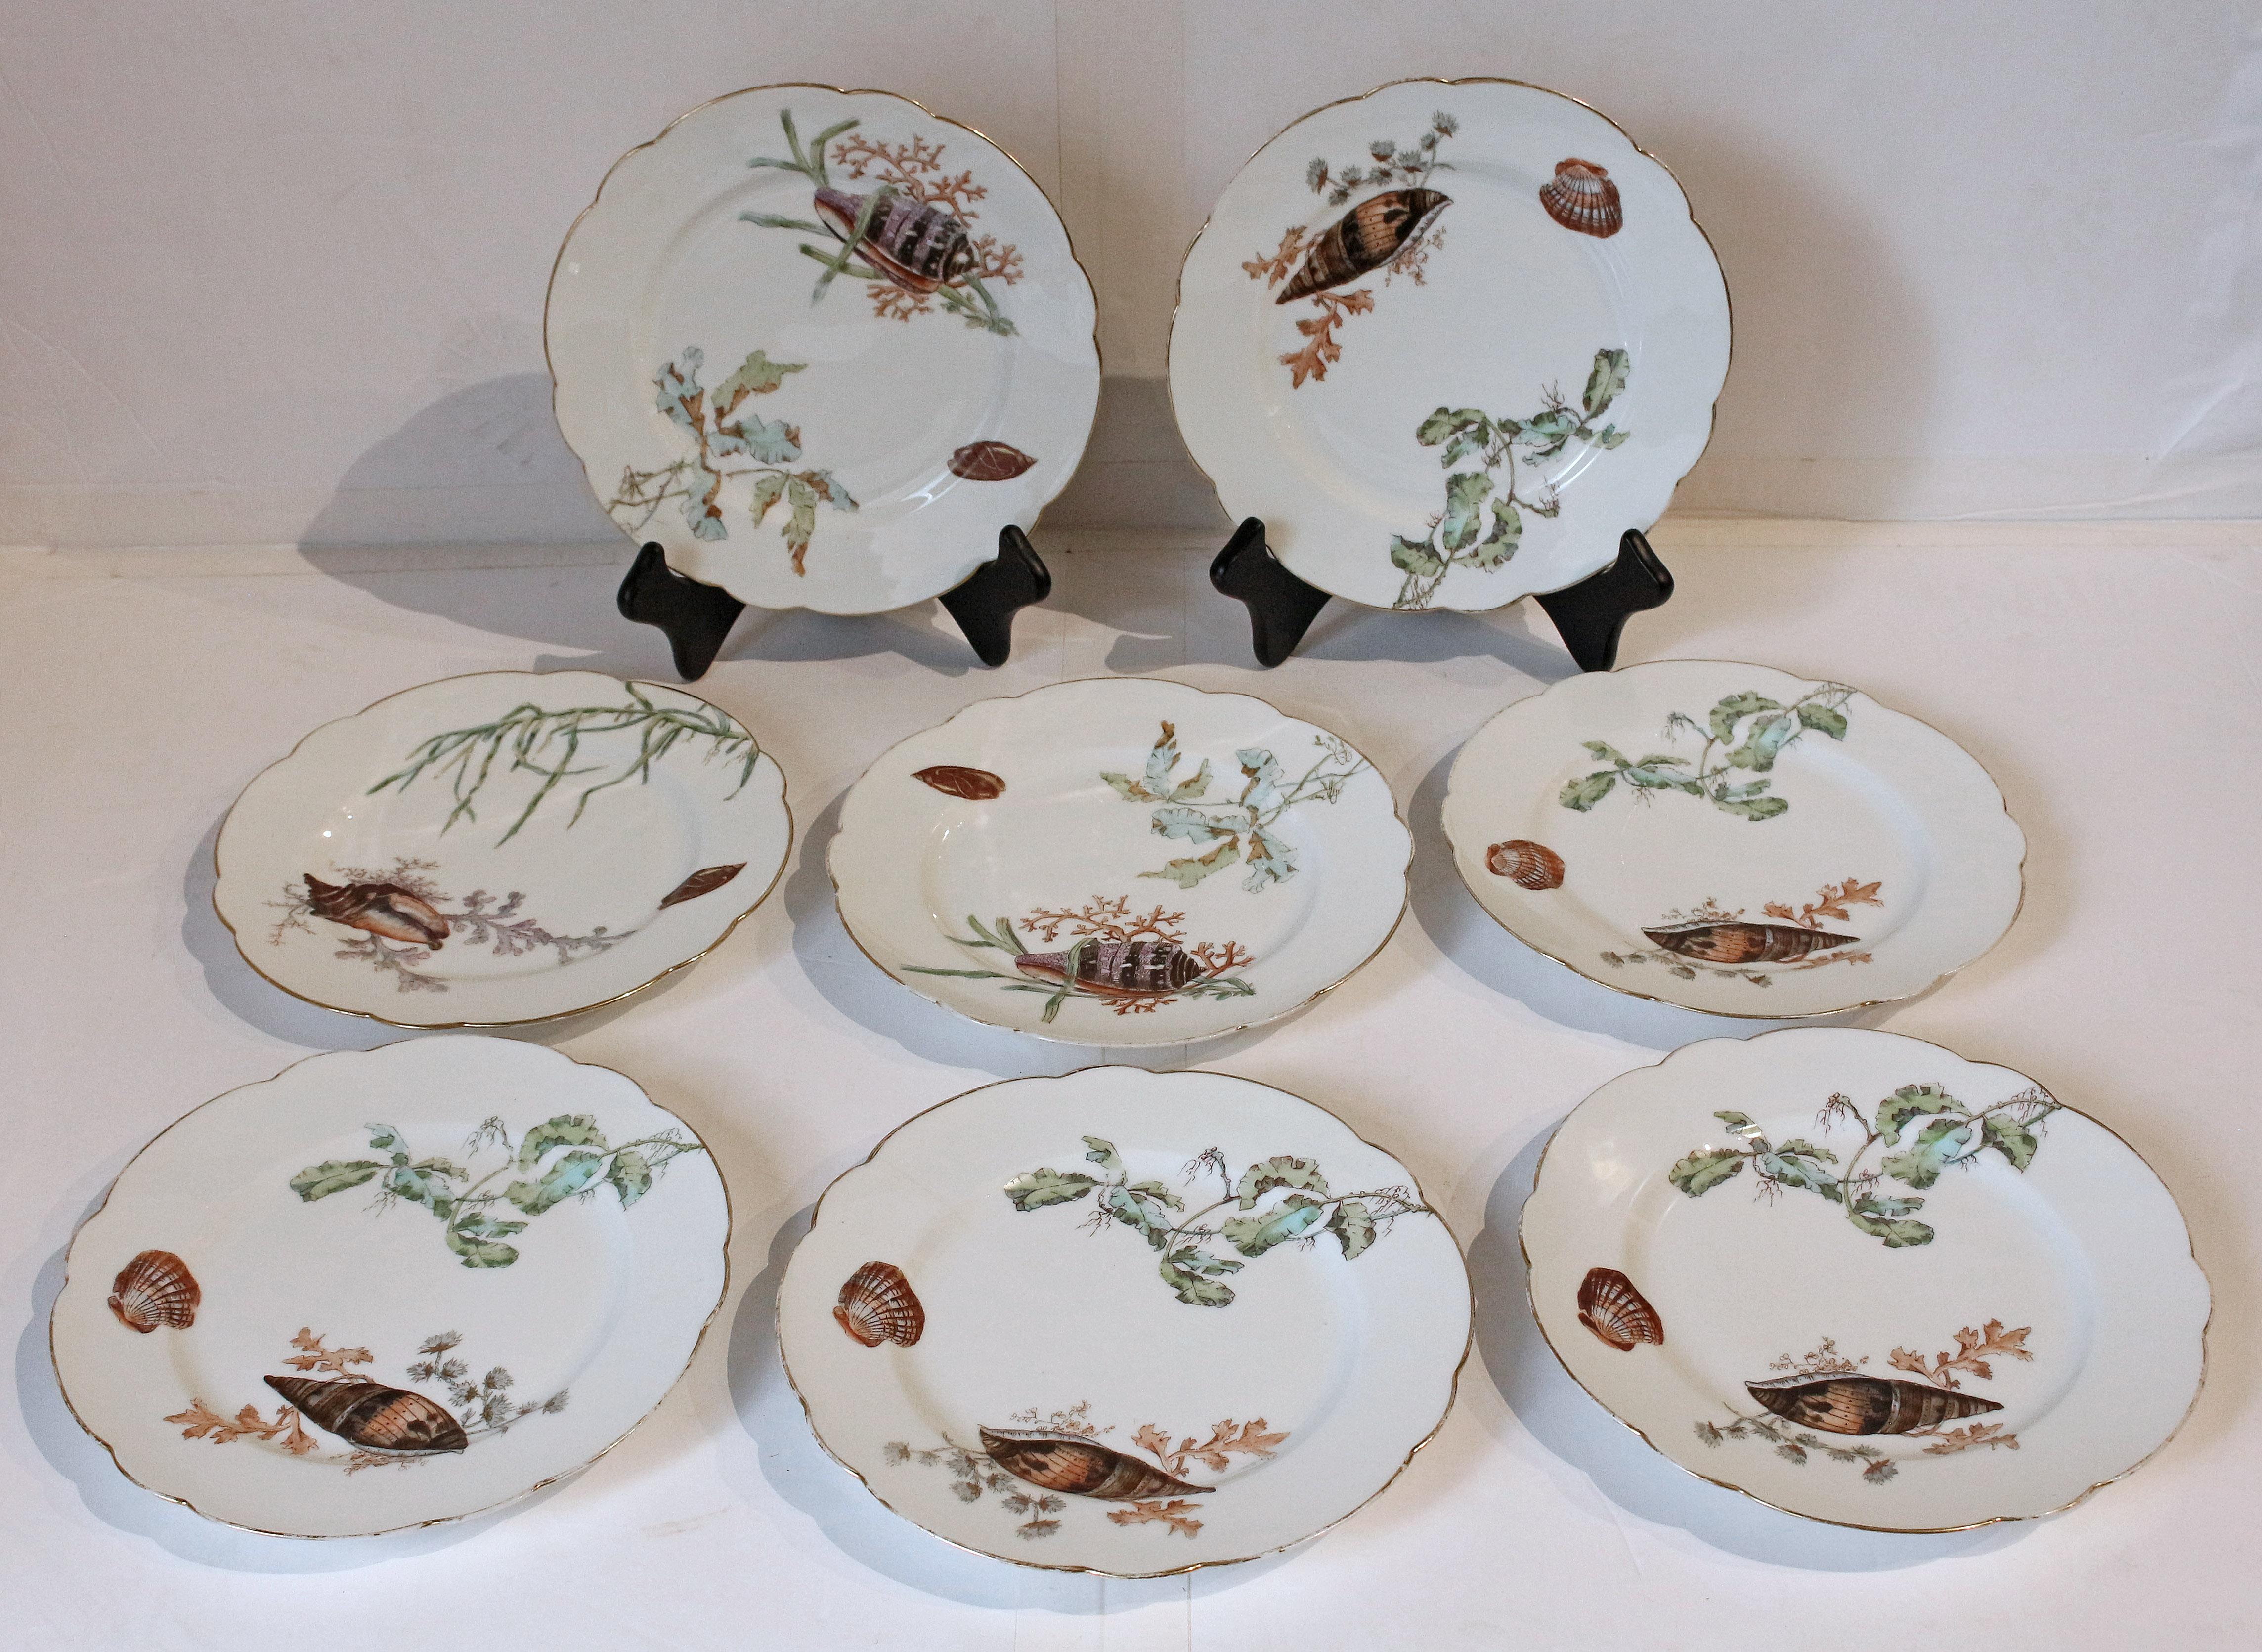 Circa 1880-1900 sea shells & seaweed motif fish service, Limoges, France. Comprised of a platter, shell bowl, 8 plates & 8 sauce dishes. All but sauce dishes are R. Delinieres & Co, Limoges, France, c.1880-1900. Sauce dishes are Theodore Haviland,